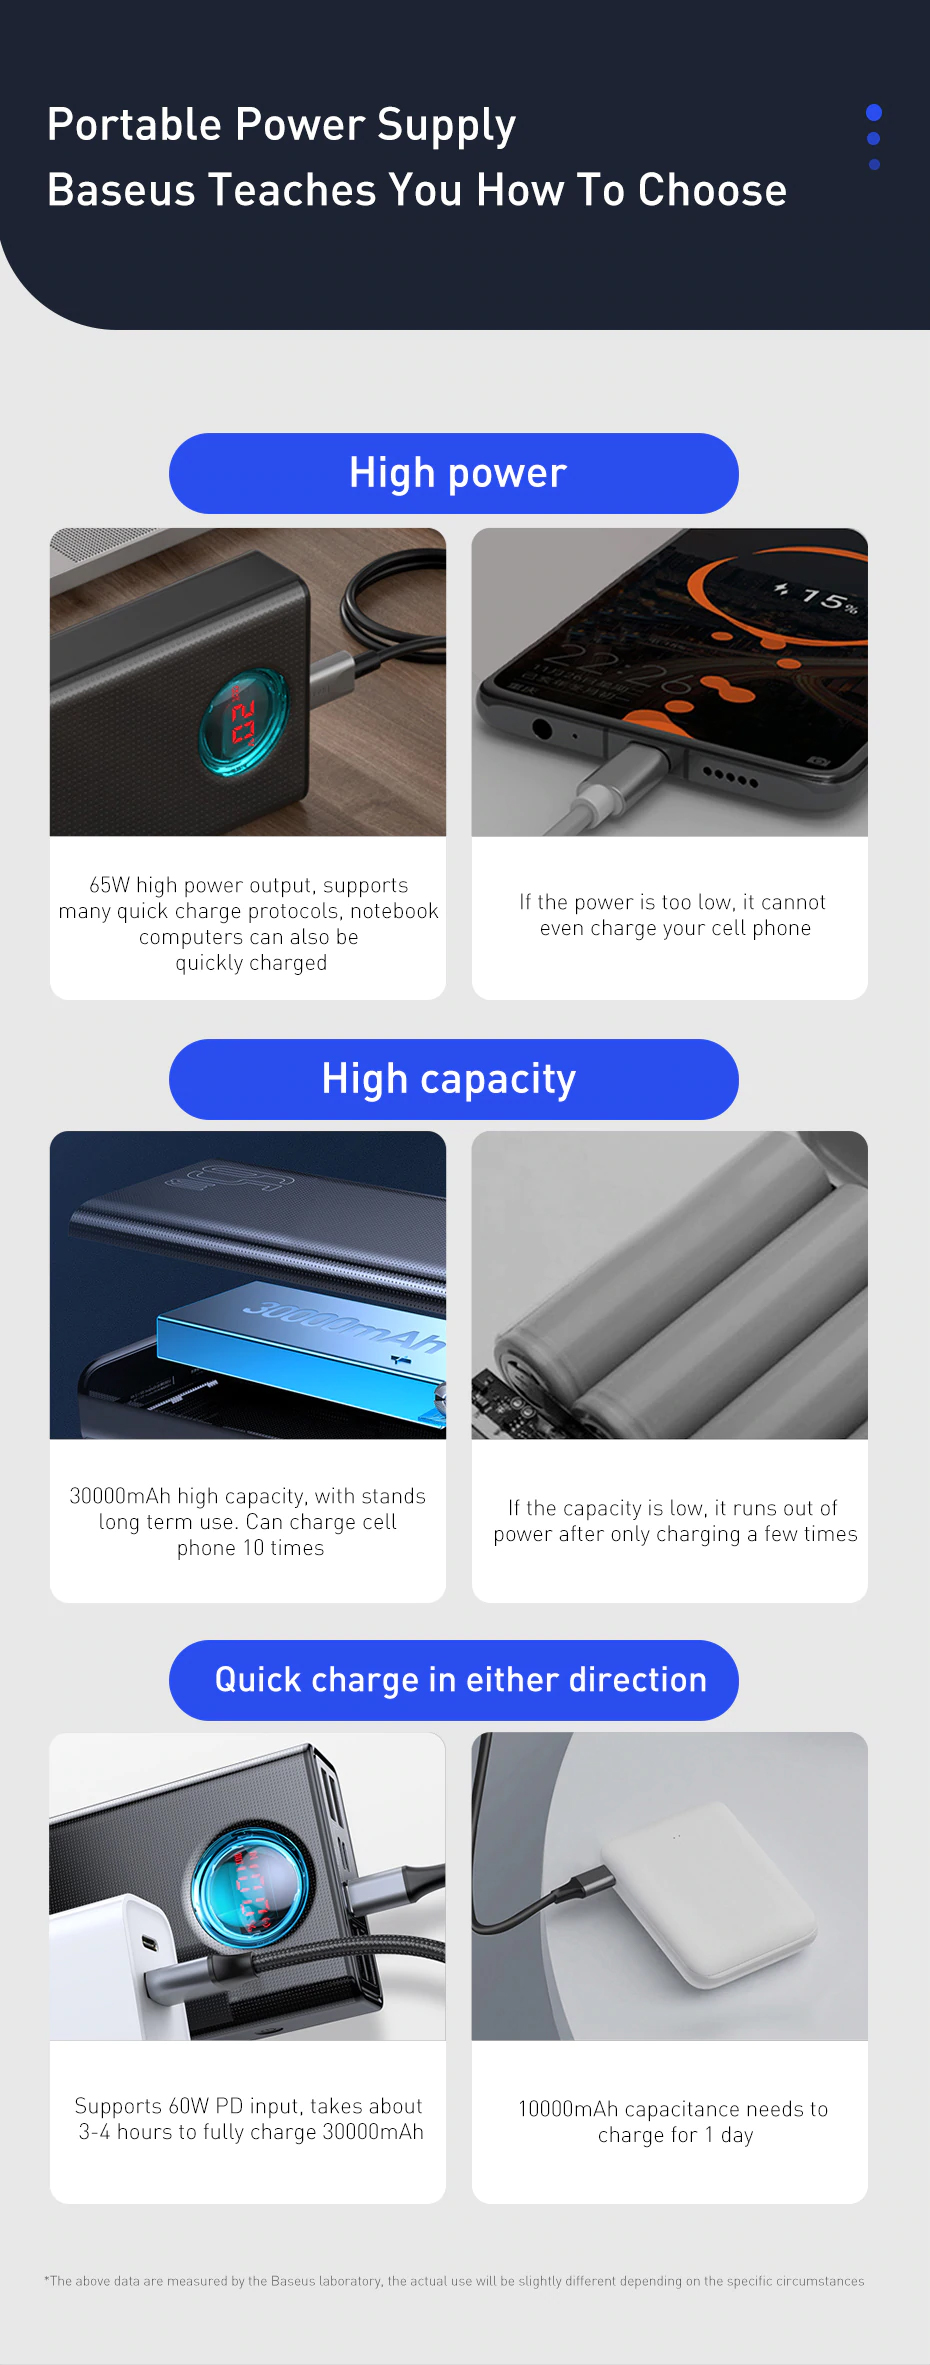 65W high power output, supports many quick charge protocols, notebook computers can also be quickly charged